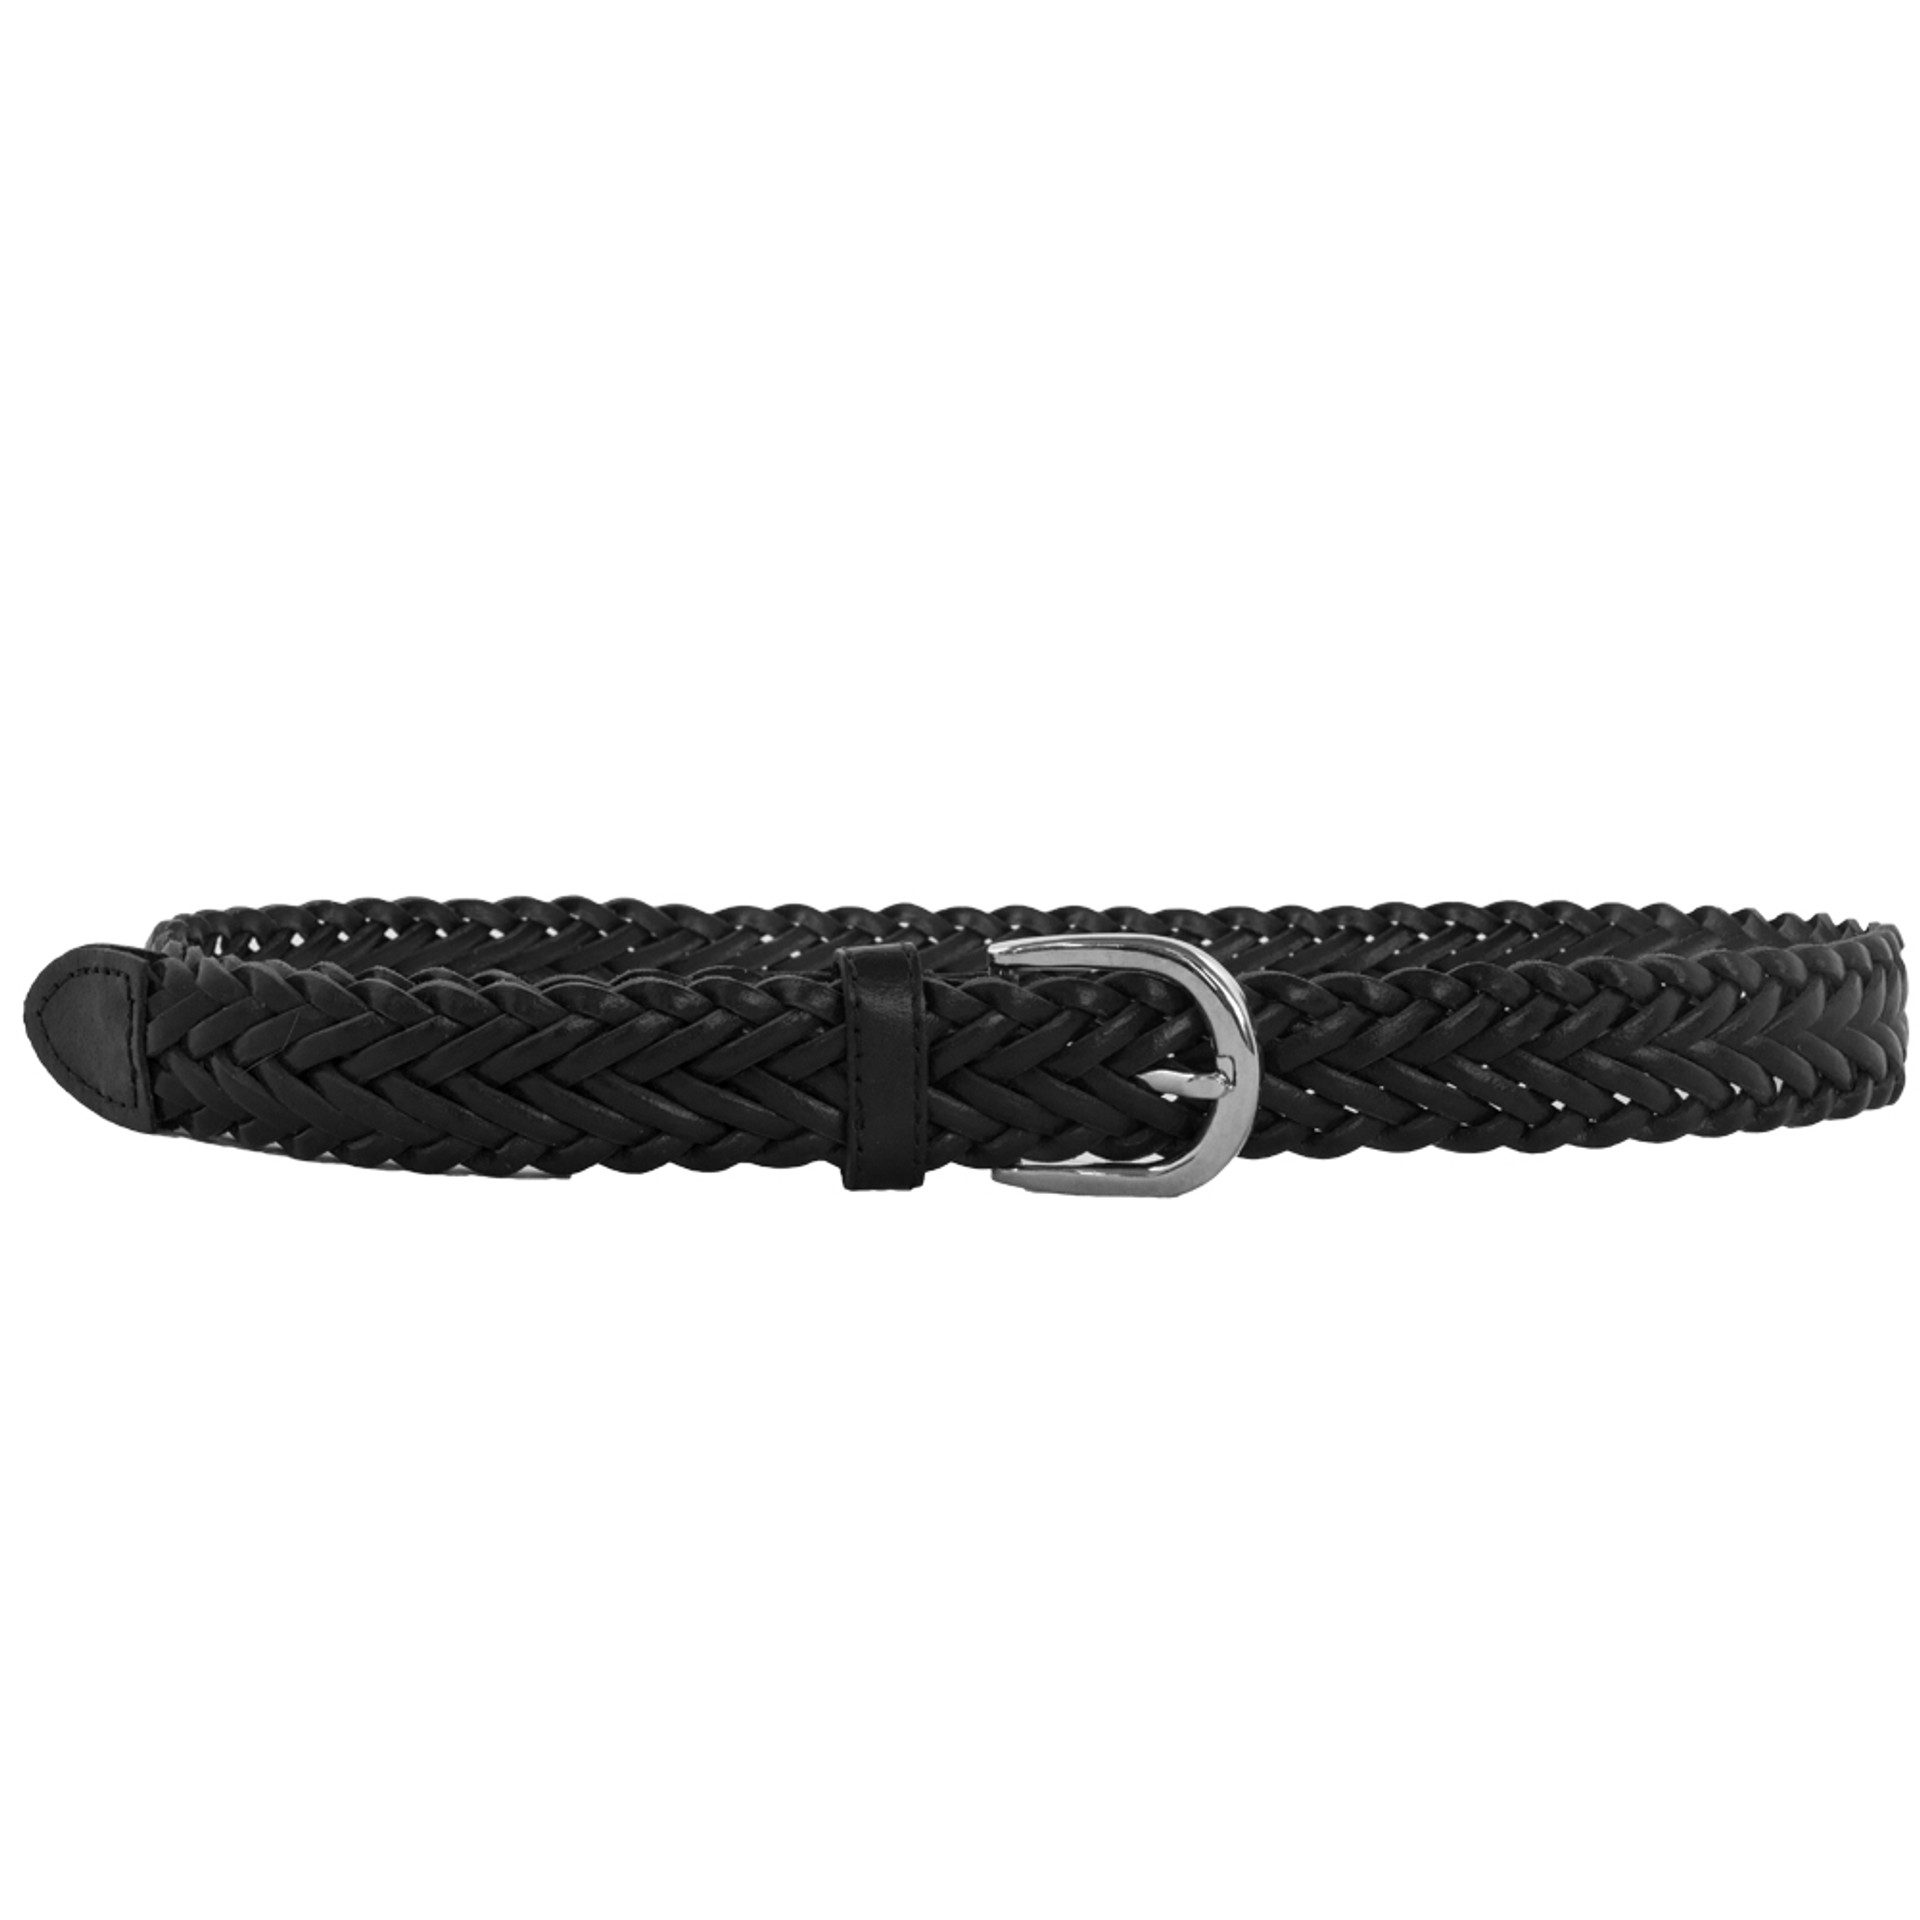 12 PACK Black Hand Braided Belts Mix Sizes 2300A